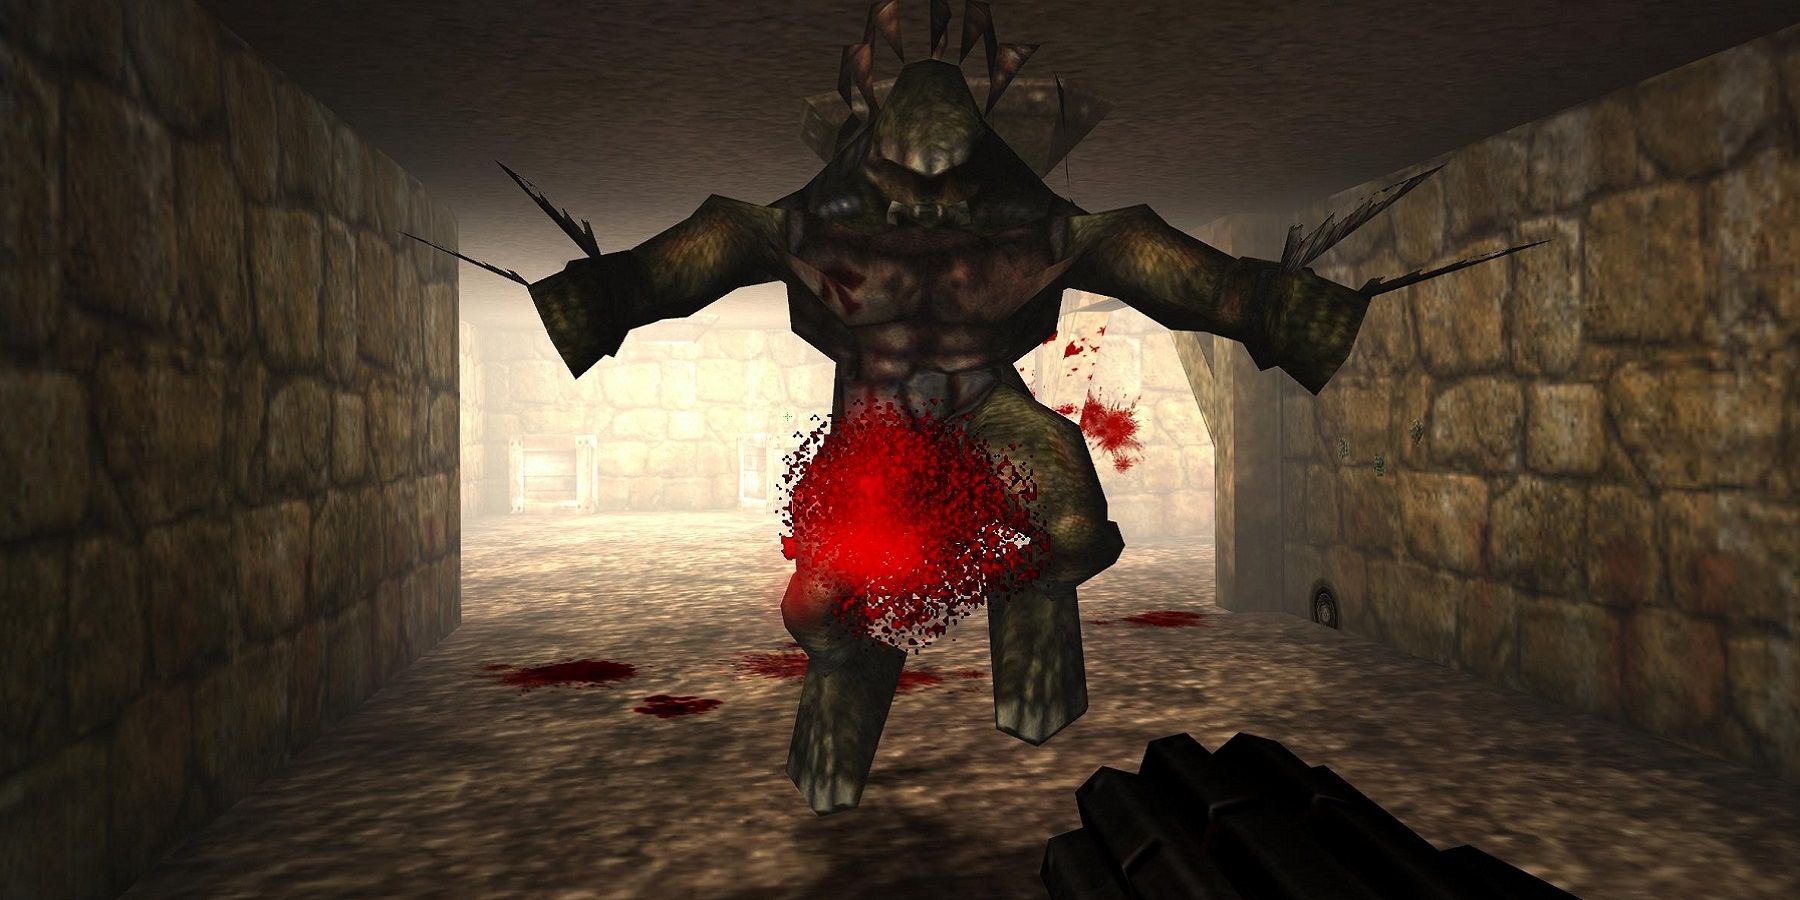 Image from the original 1998 Unreal game showing the player shooting a monster in a tunnel.